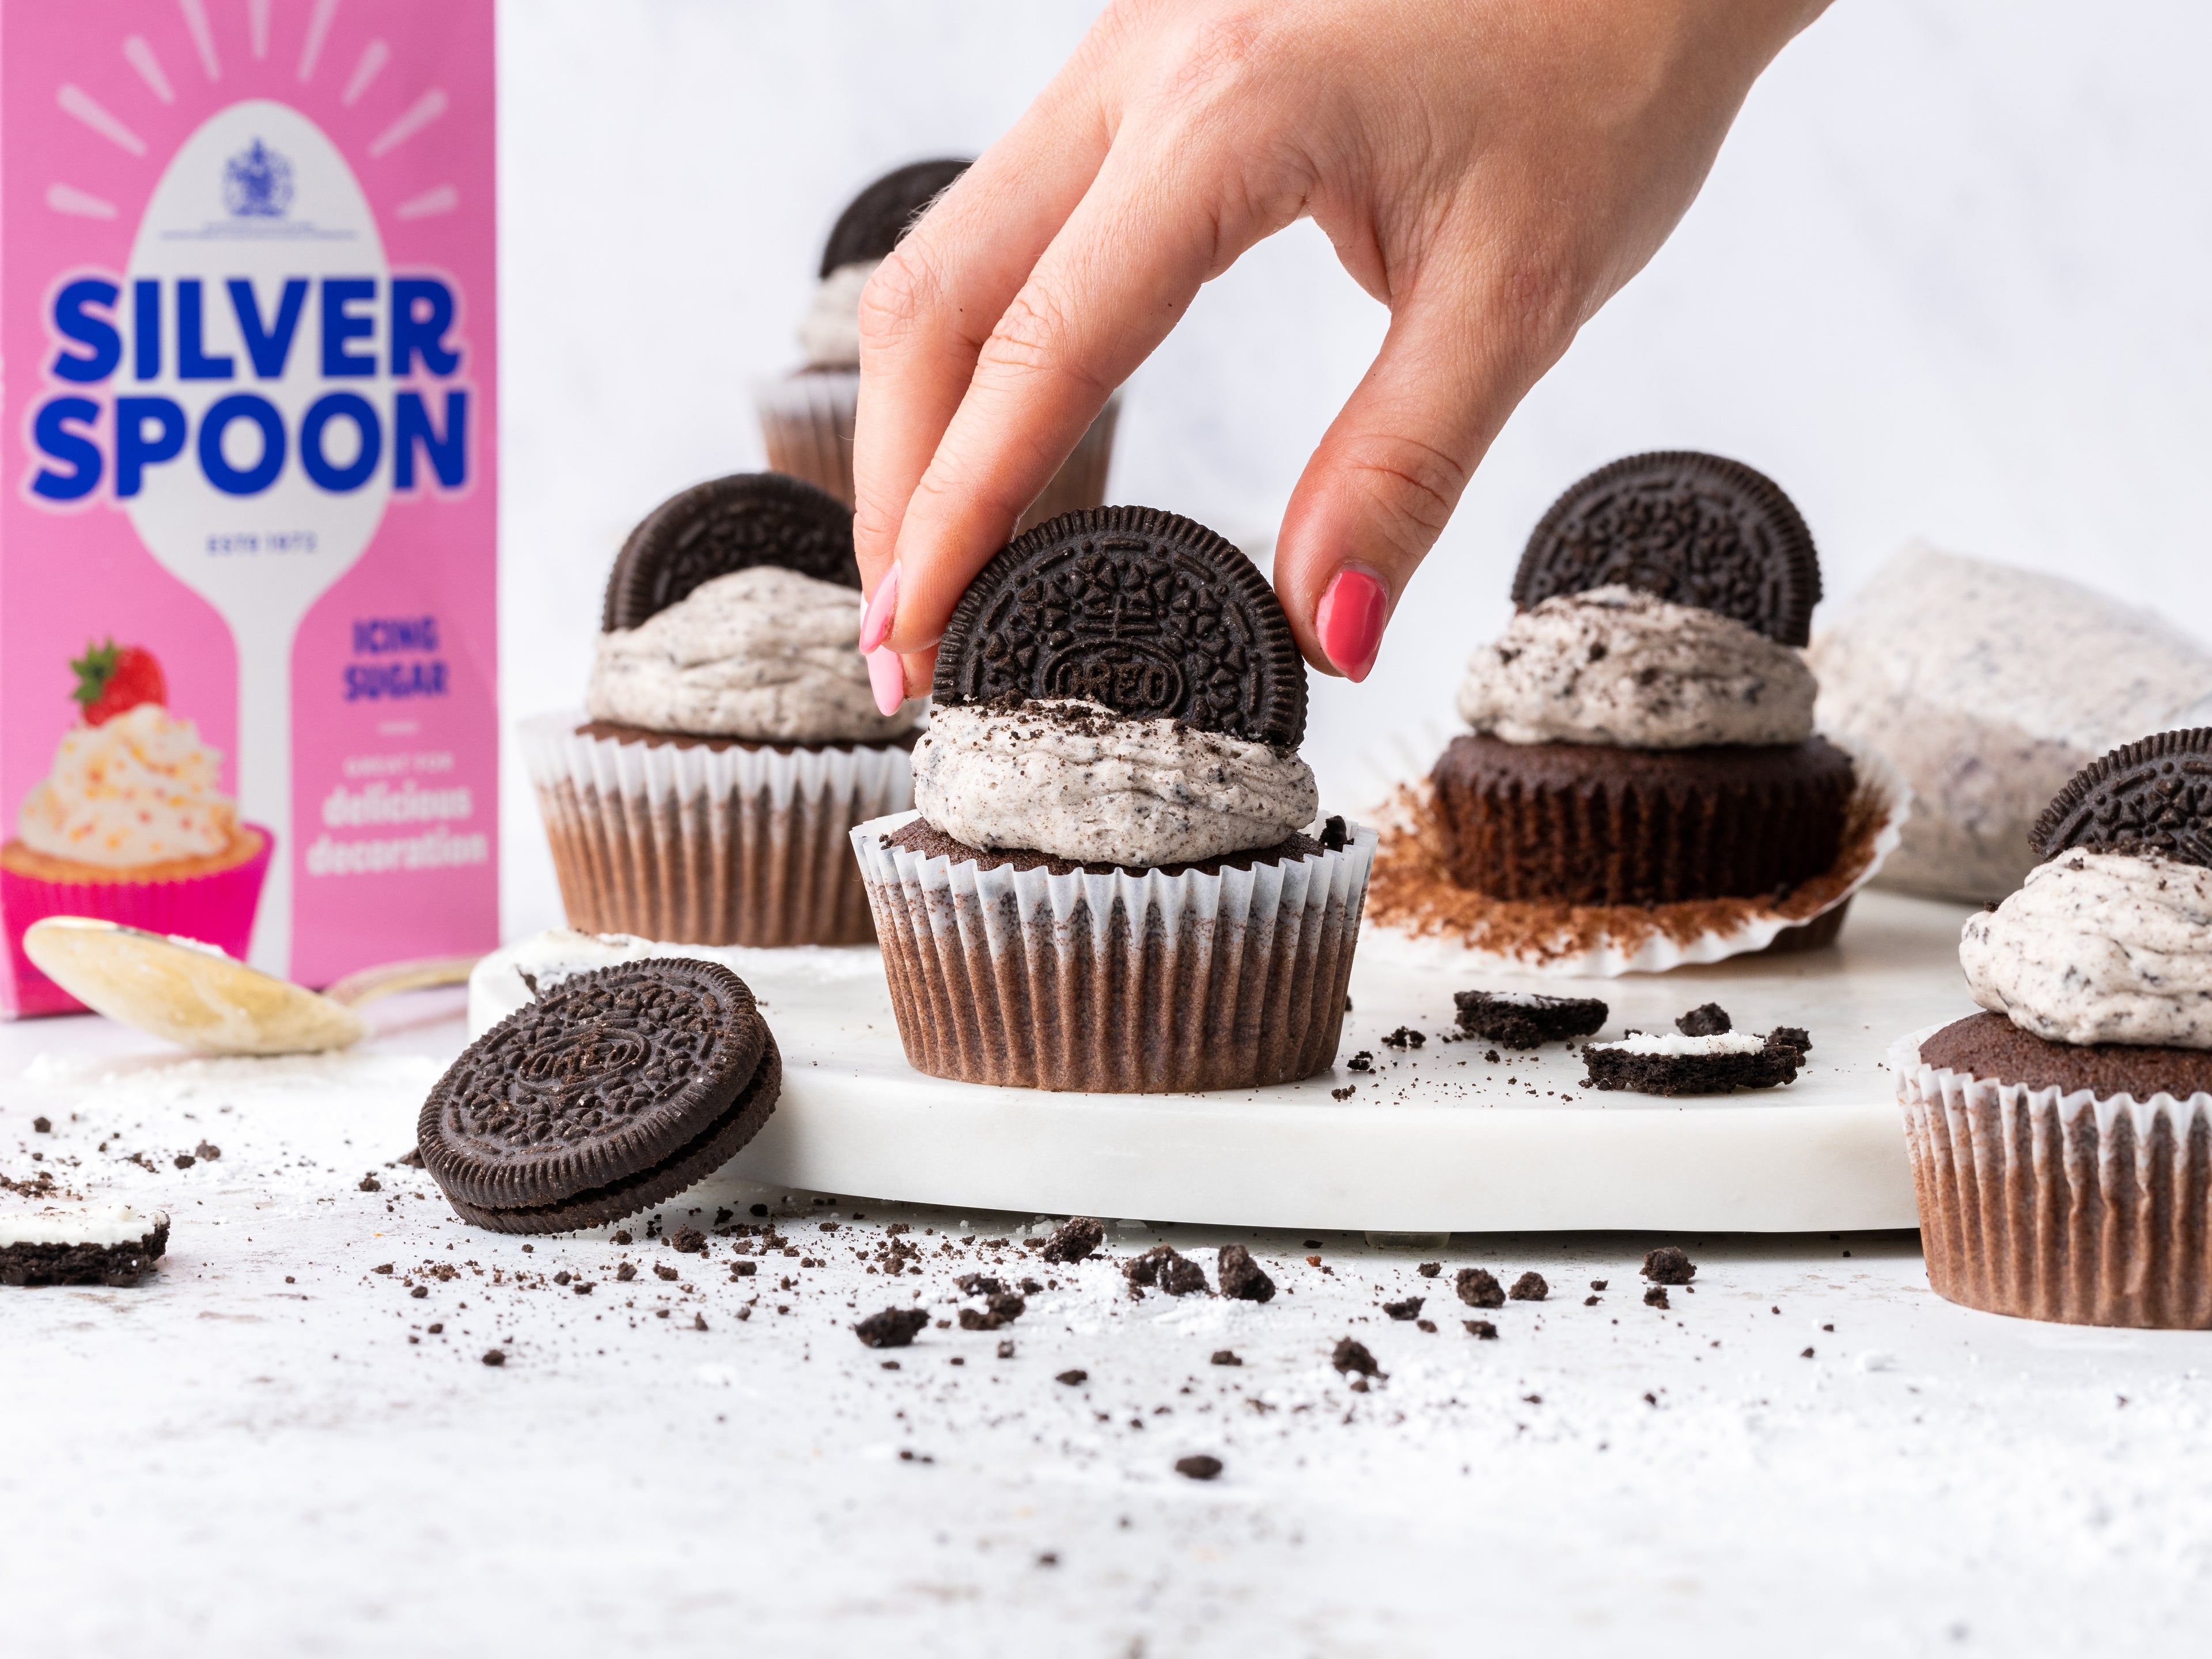 Hand reaching in to place an oreo on top of a cupcake